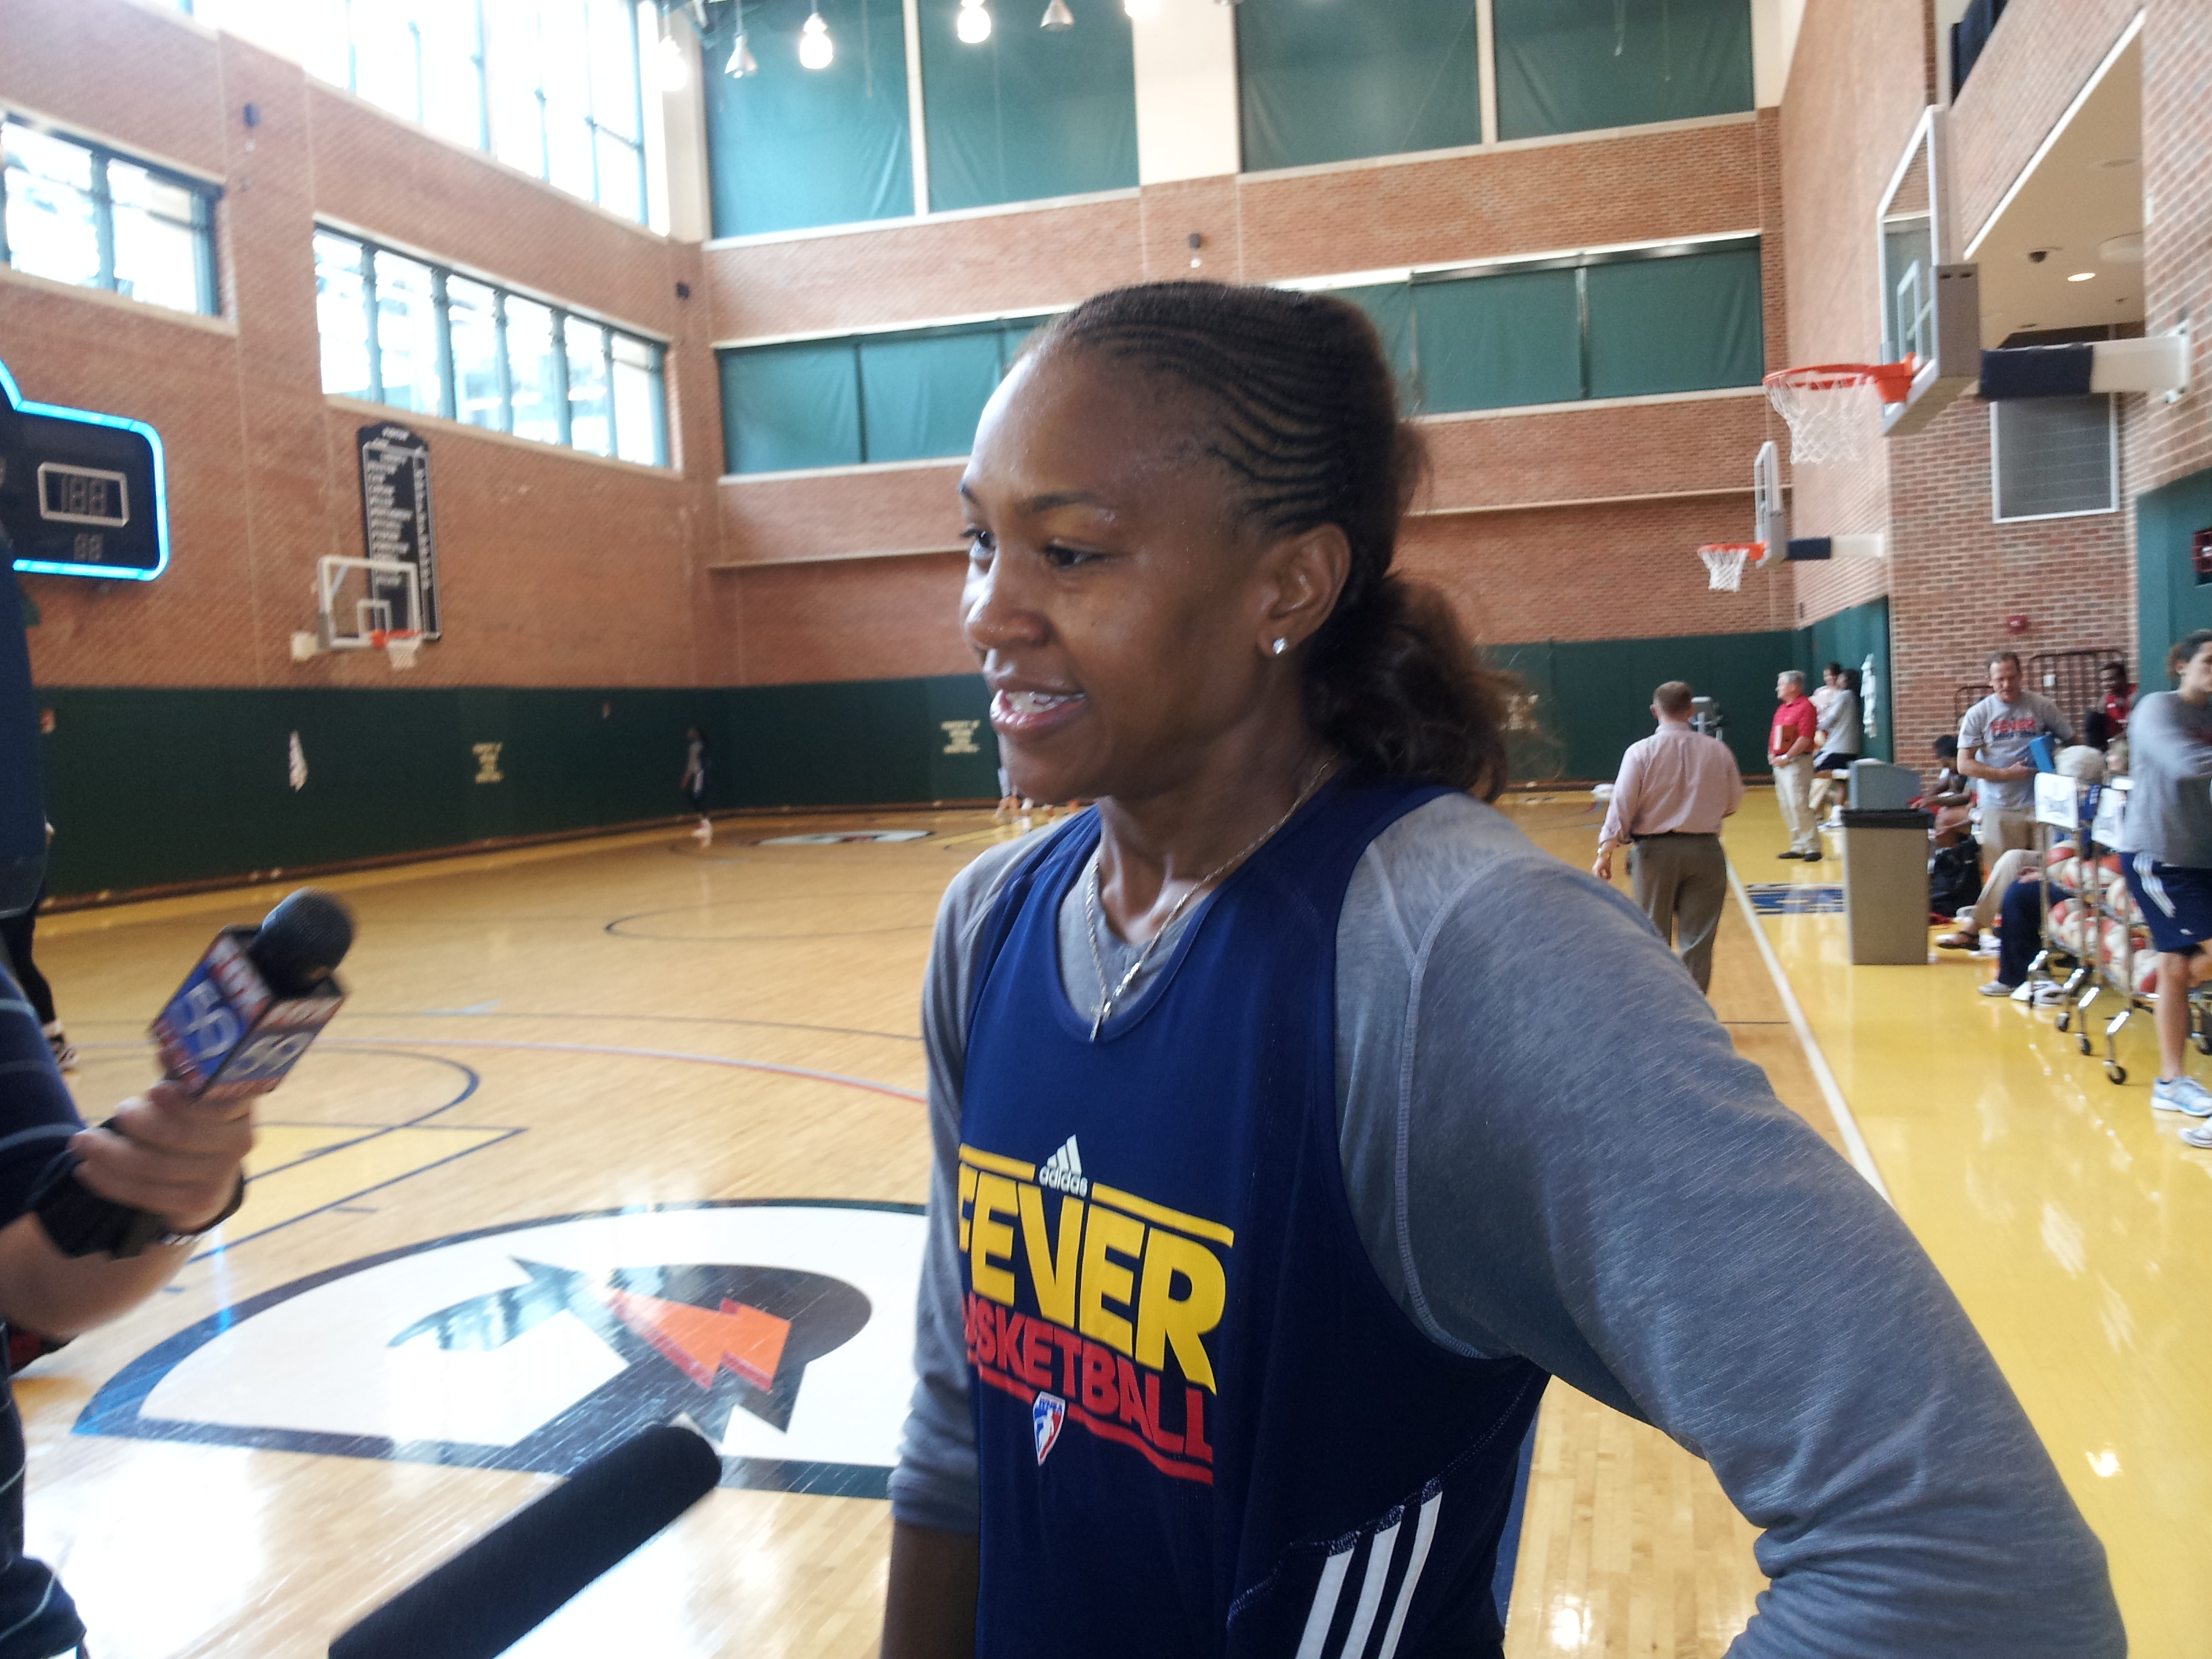 Indiana Fever Blog – The Indiana Fever and Women's Basketball